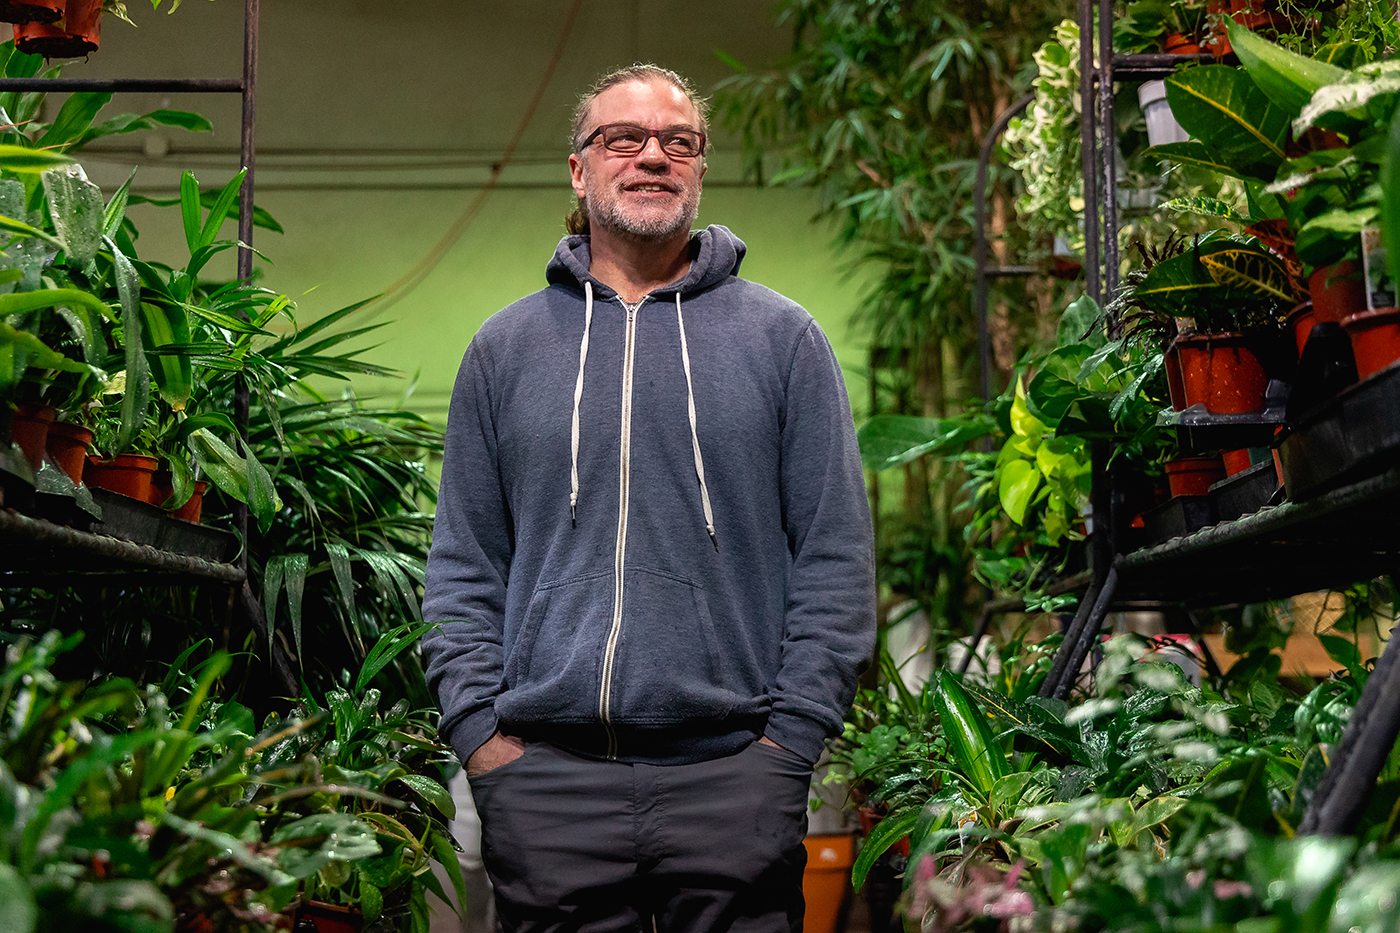 John Mueller has owned and operated Paradise Palm since 1998 and has made caring for and educating people about indoor plants his life’s work.